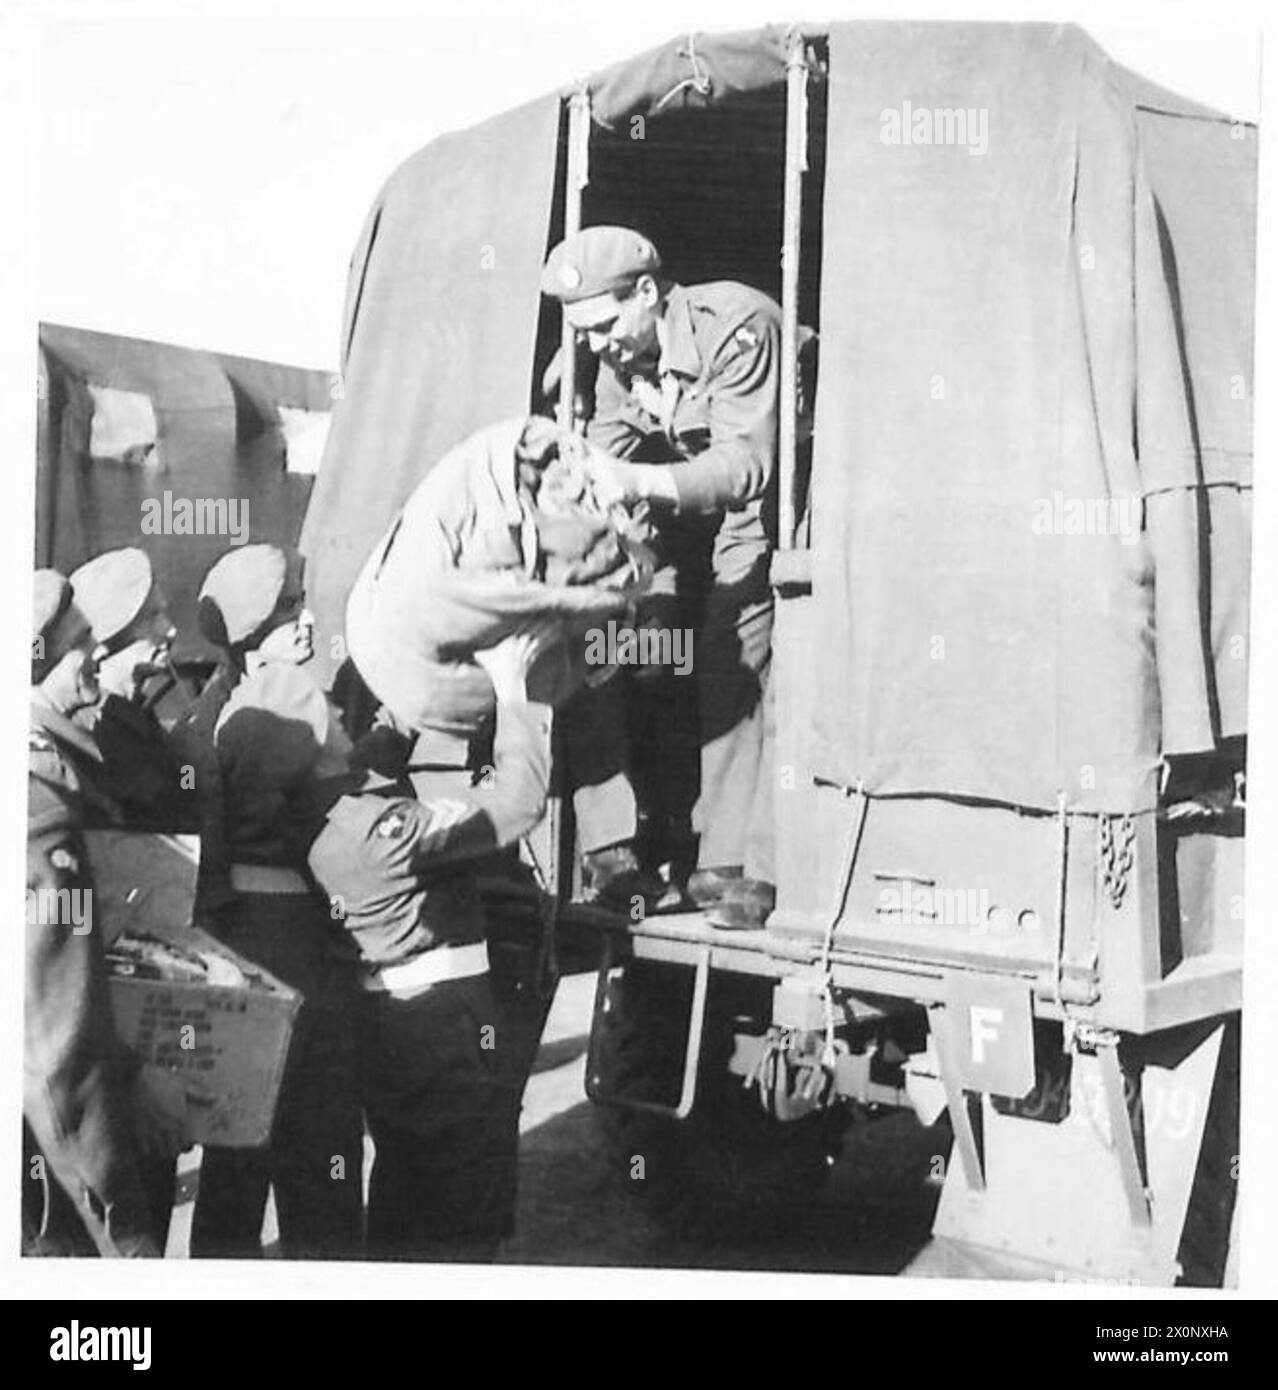 EIGHTH ARMY : THE ROAD HOME - Cpl. Cook and Rfn. Blackman climb into a transport. Photographic negative , British Army Stock Photo